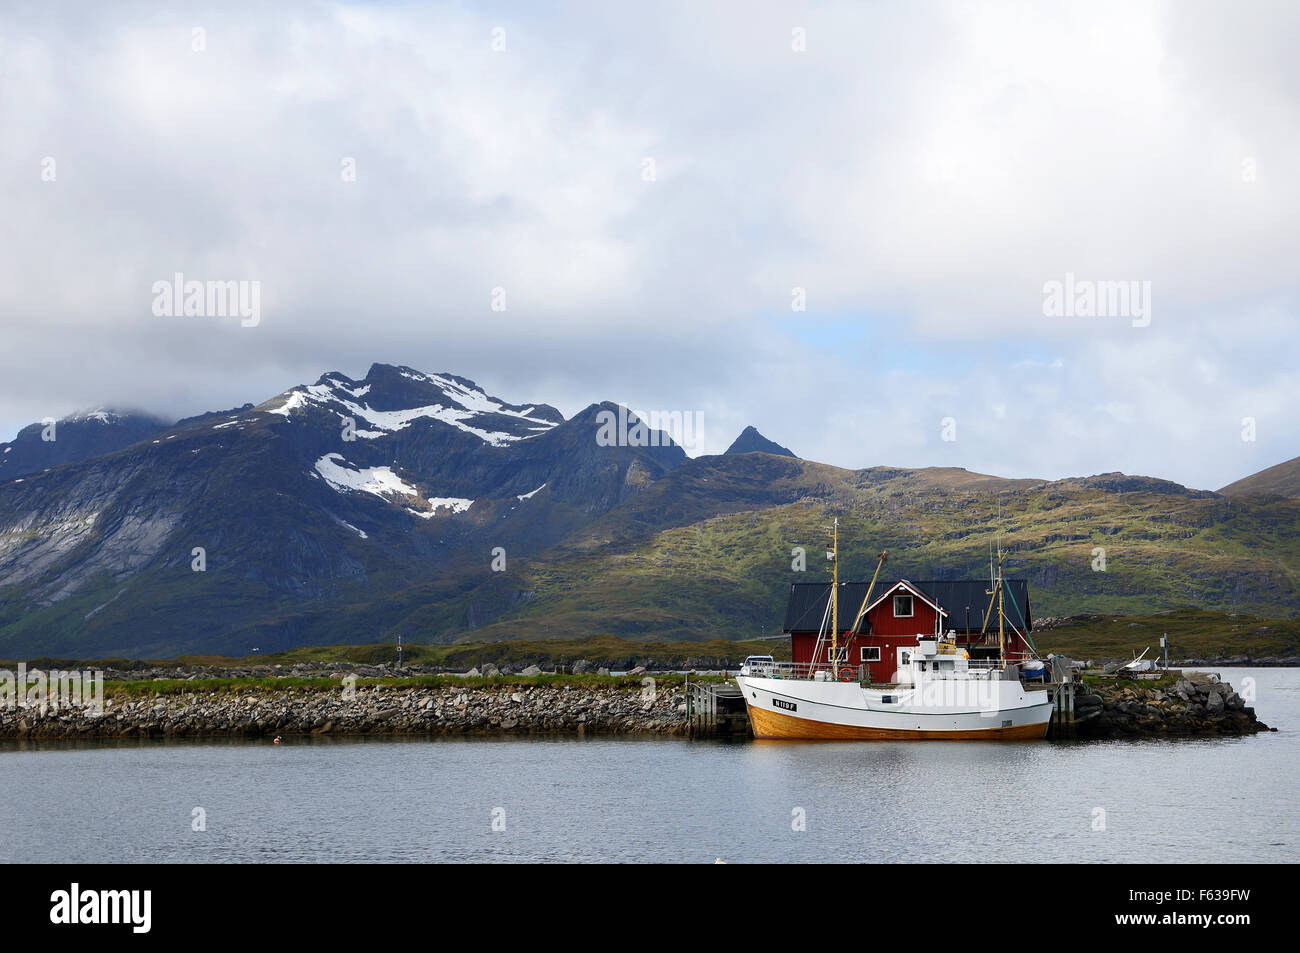 Fishing boat and fisherman's cabin on the Lofoten Islands, Norway. Stock Photo